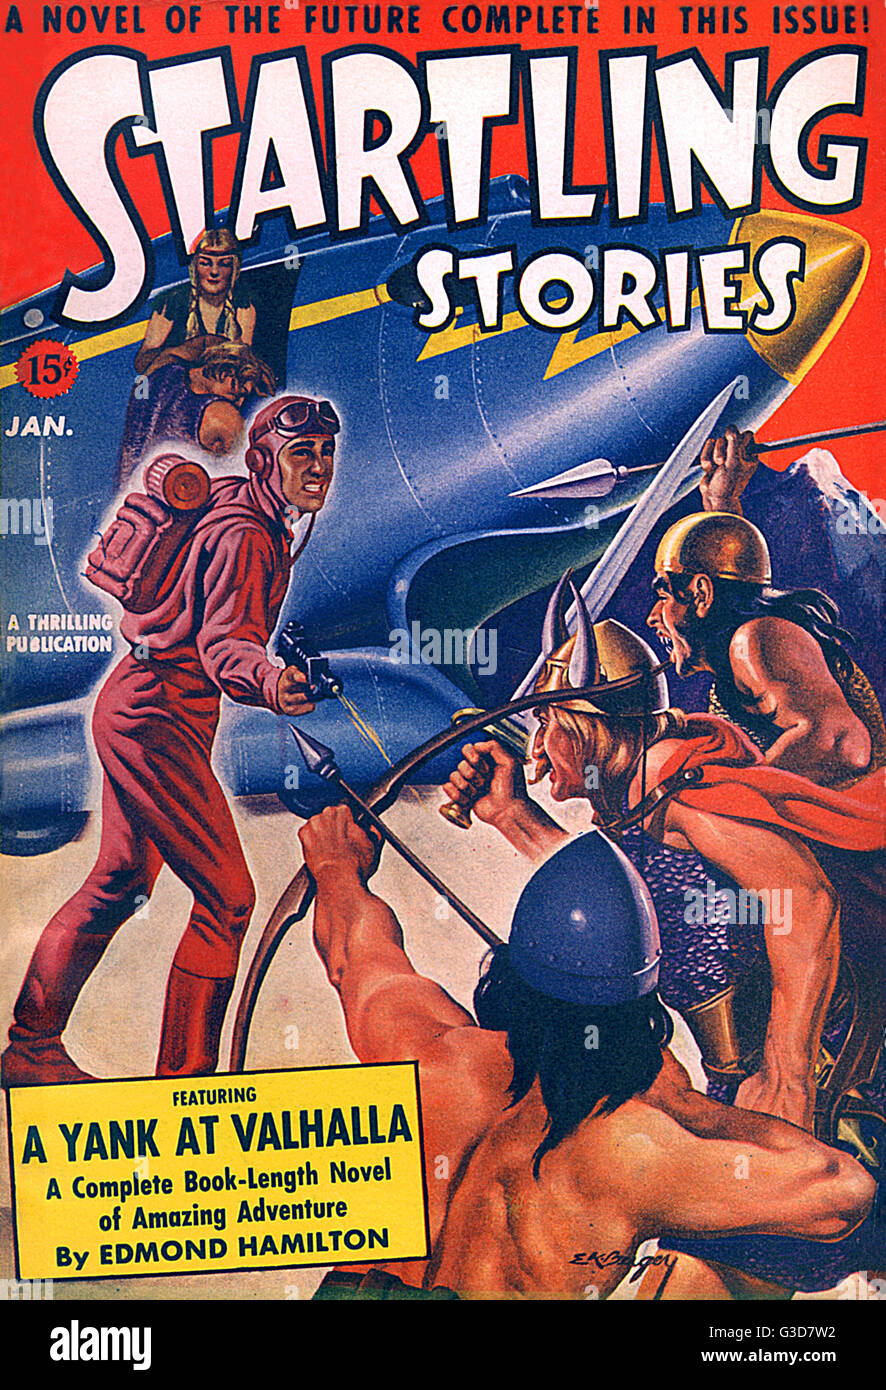 Startling Stories - Sci Fi Mag - A Yank At Valhalla Stock Photo